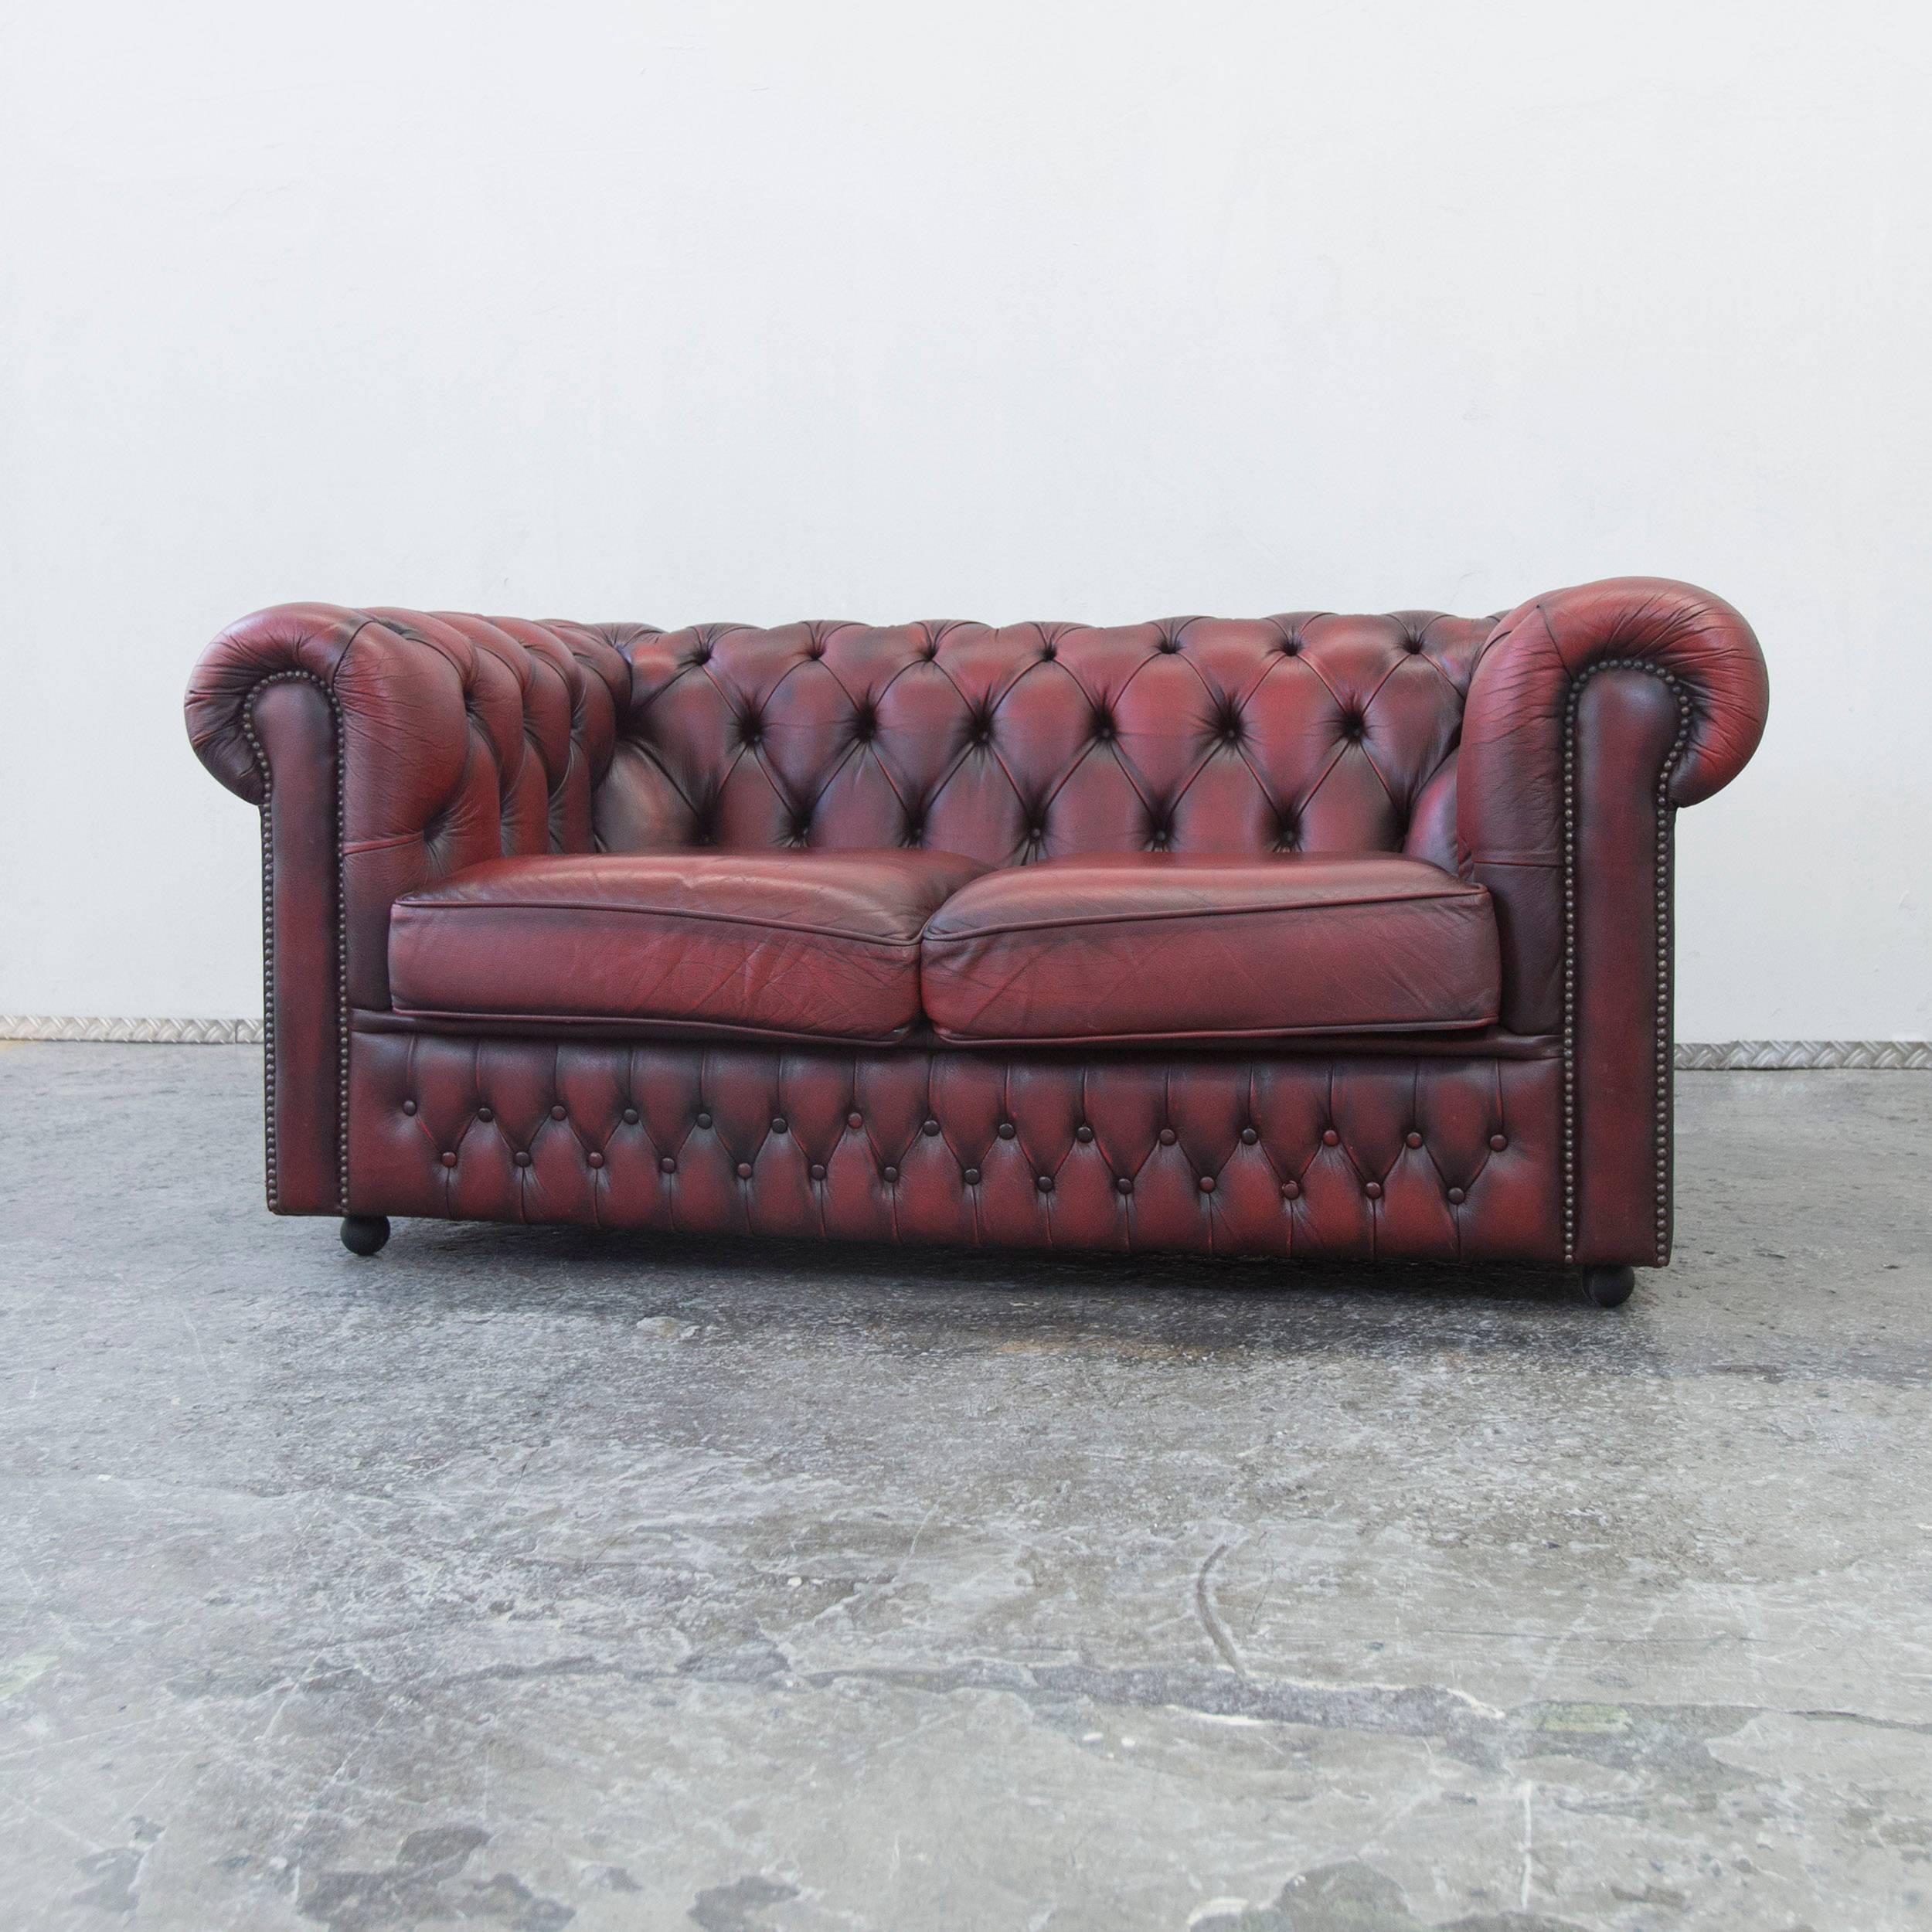 red vintage couch